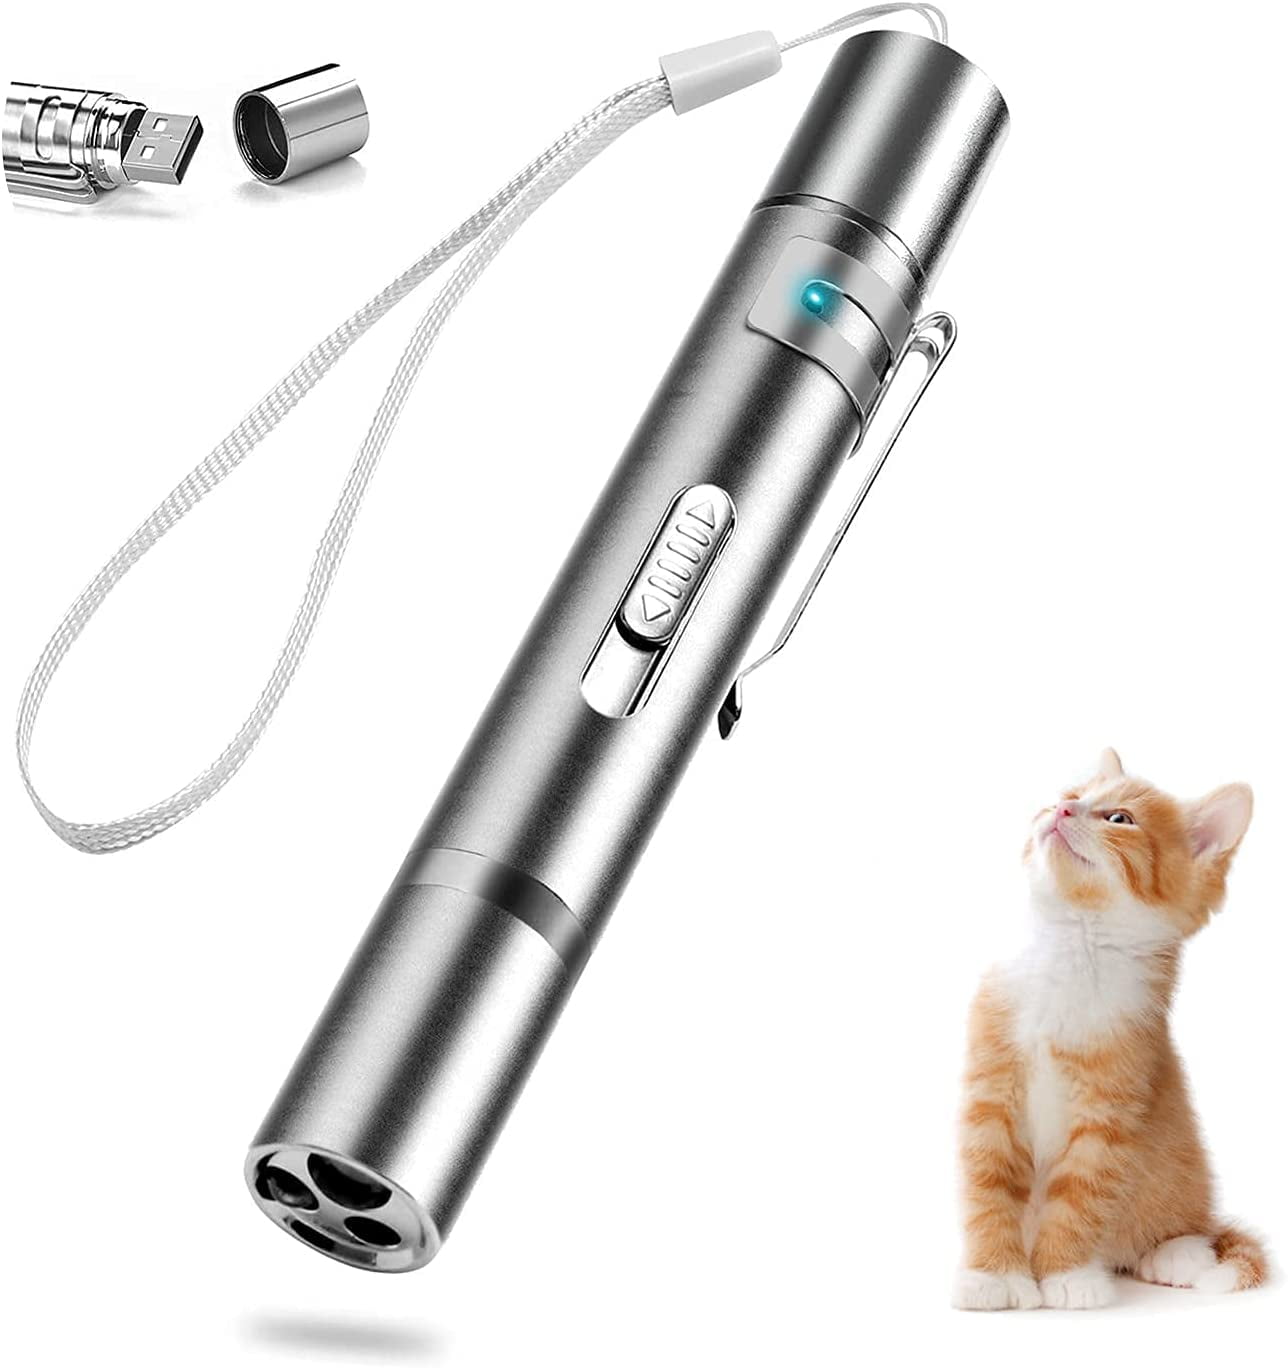 USB Recharge Remote Presenter Clicker for Indoor Classroom Interactive Teaching Cat Toys for Indoor Cats Laser Pointer for Cats Dogs 